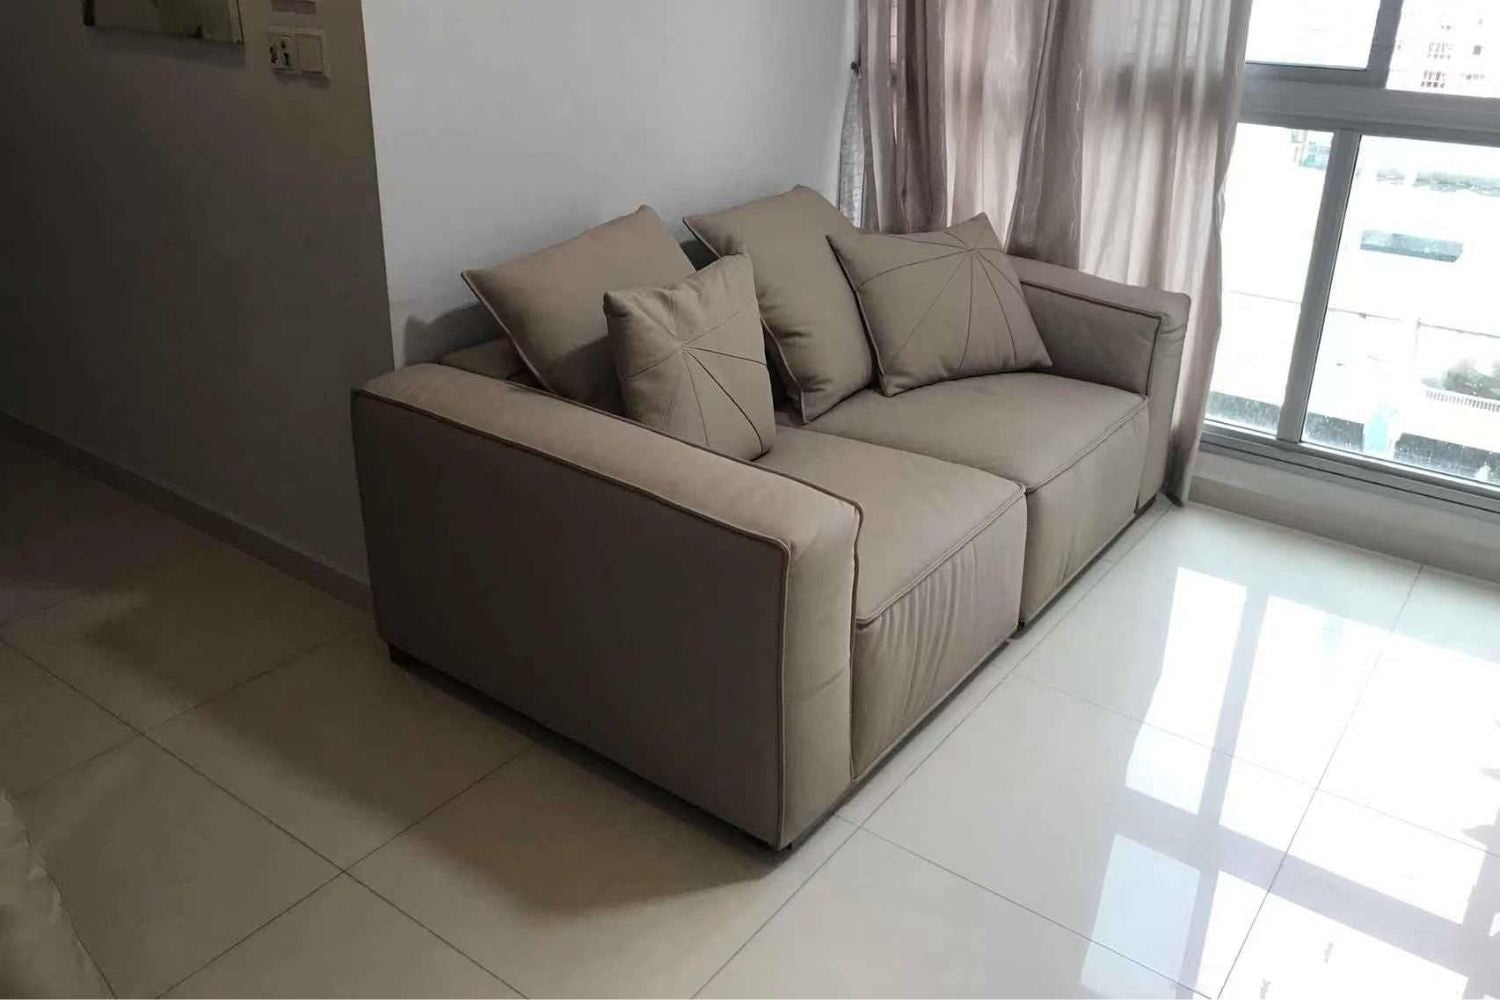 Carson 180cm half leather sofa with no side weavings in customer's home